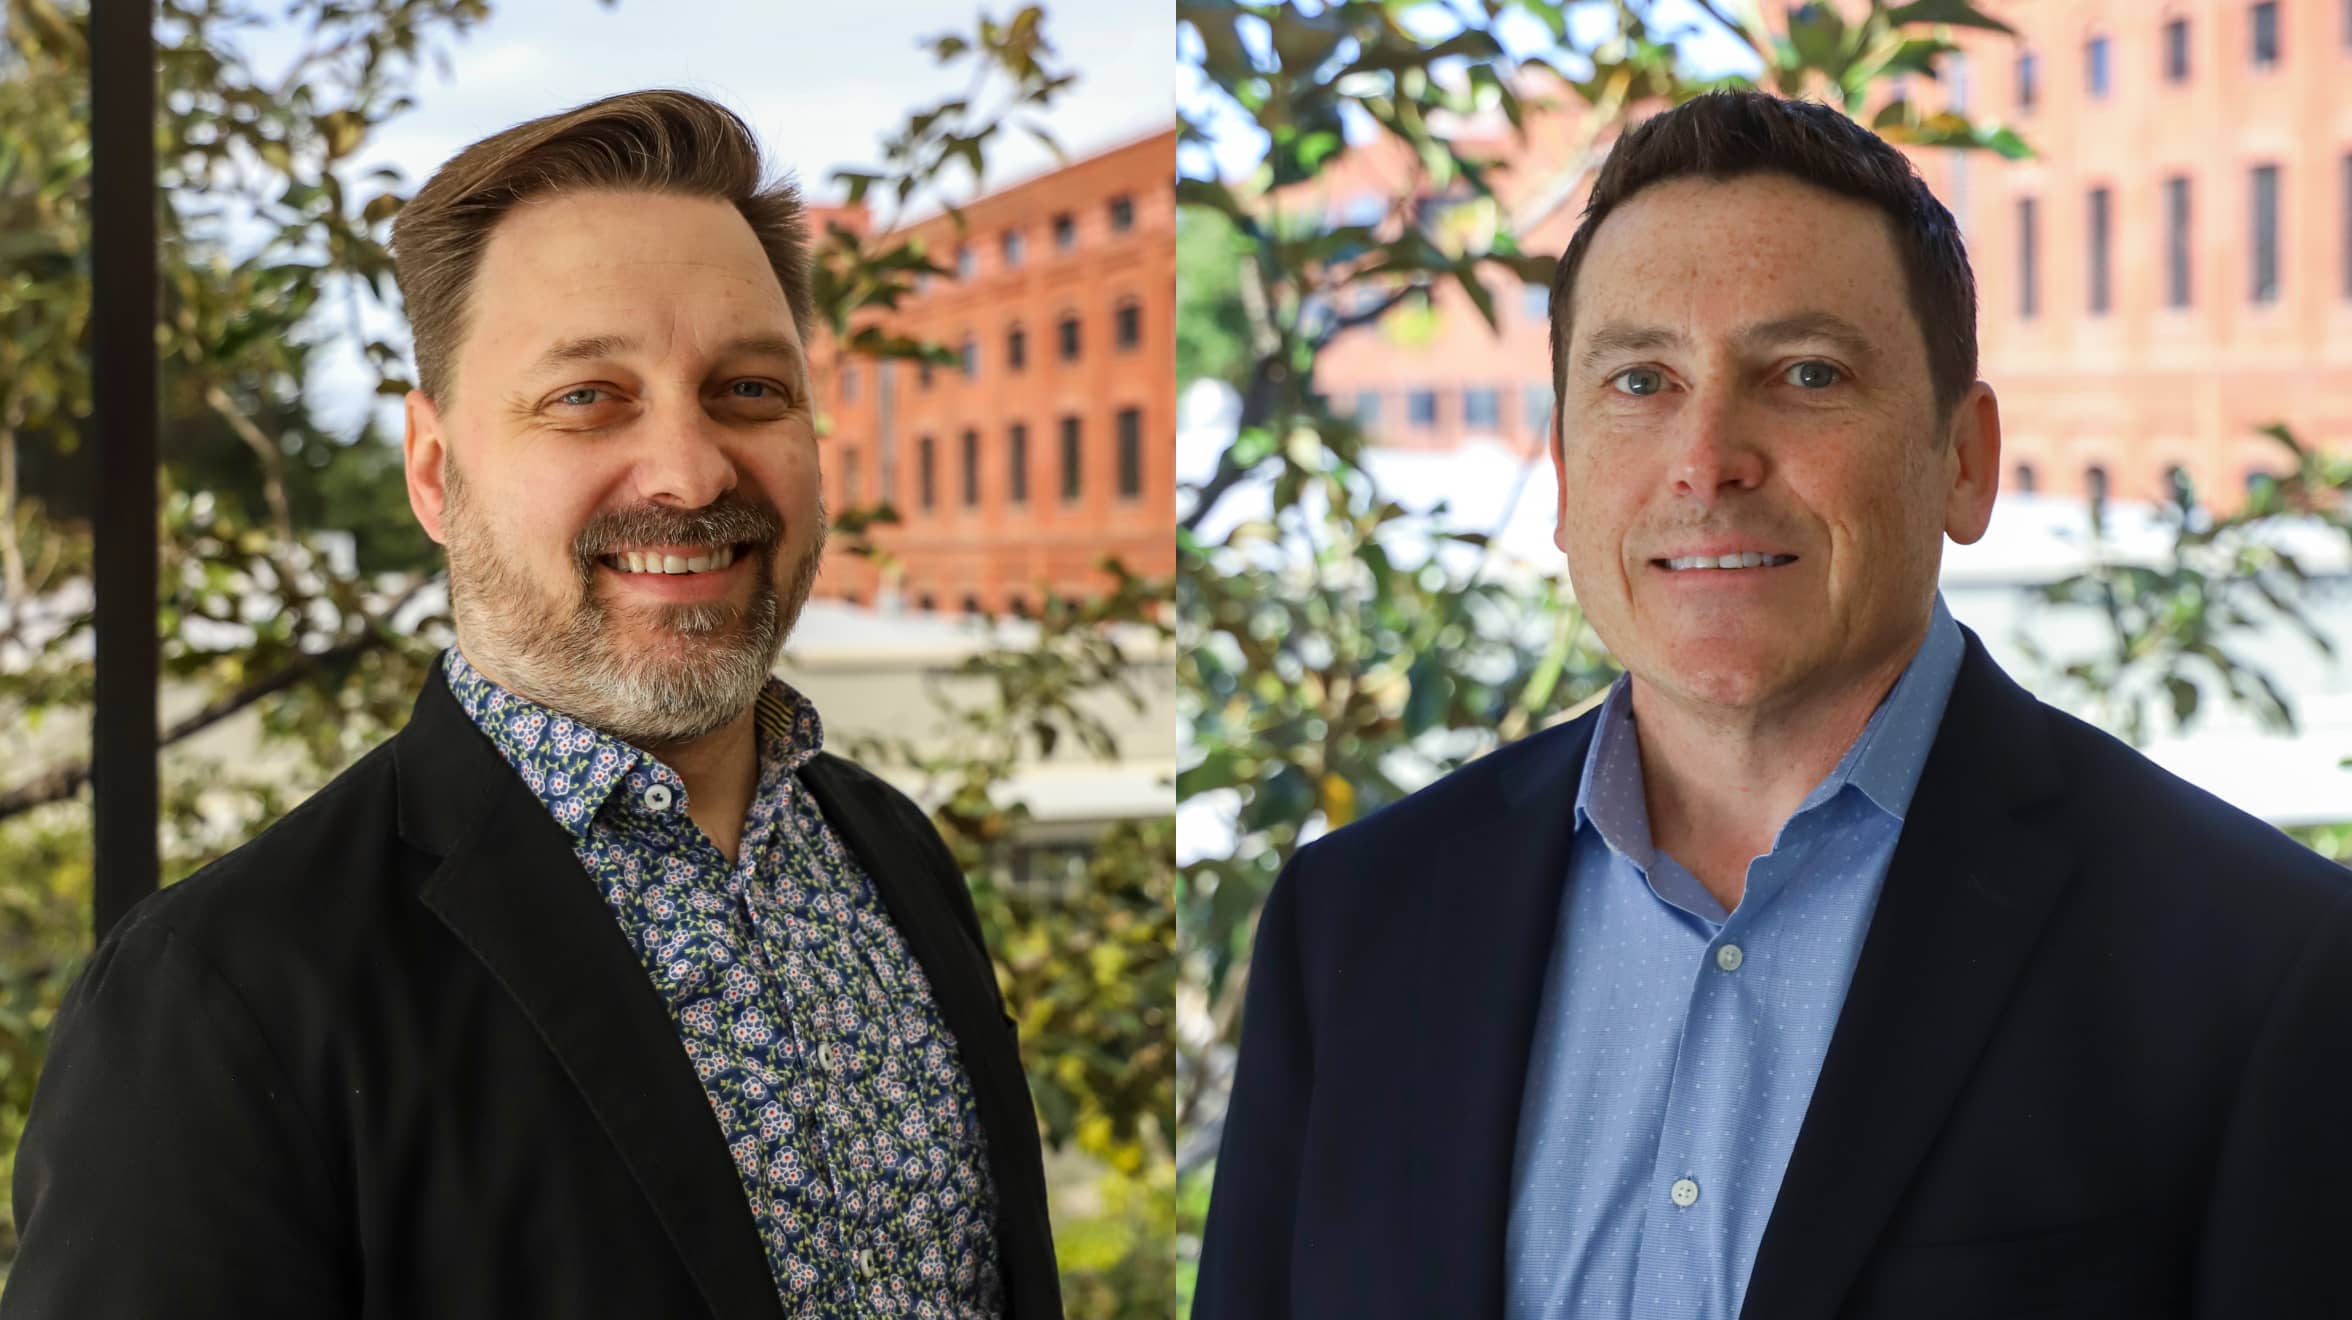 Brad Kisicki (left) has been with the firm for 11 years and becomes a Principal in the New York office. Patrick McCue (right) is the firm’s Chief Financial and Operating Officer.